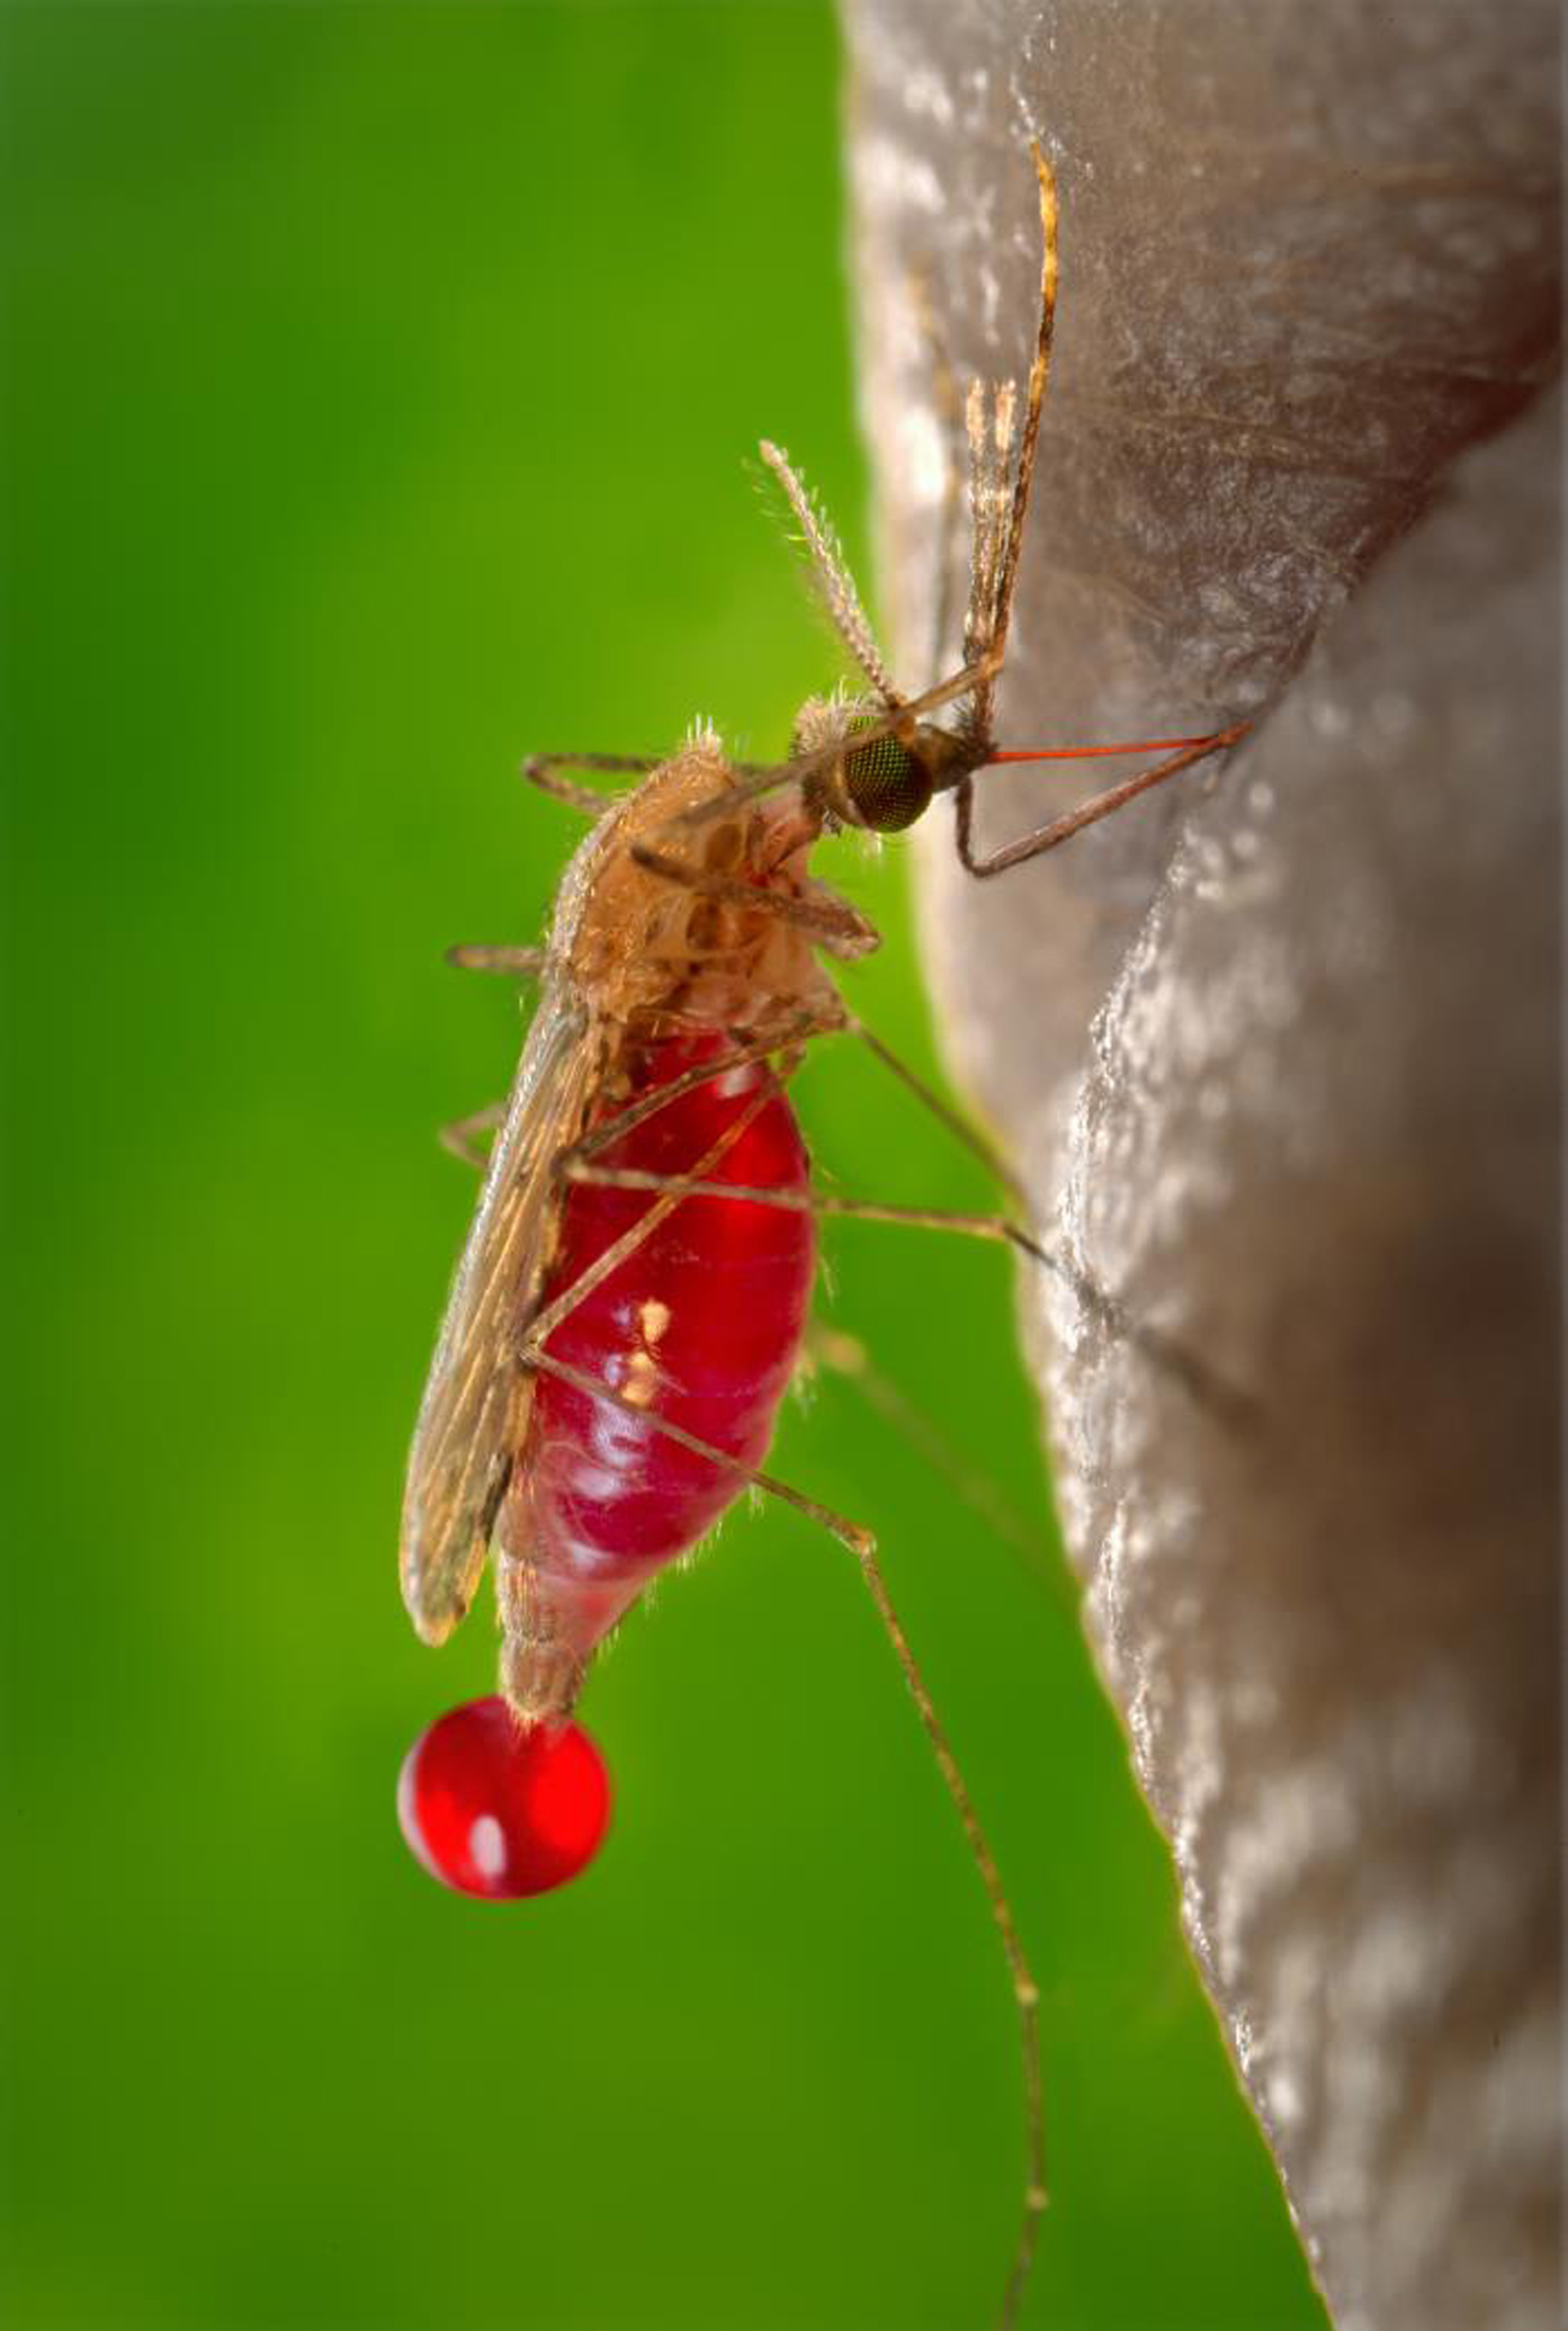 Mosquito feeds on human host.